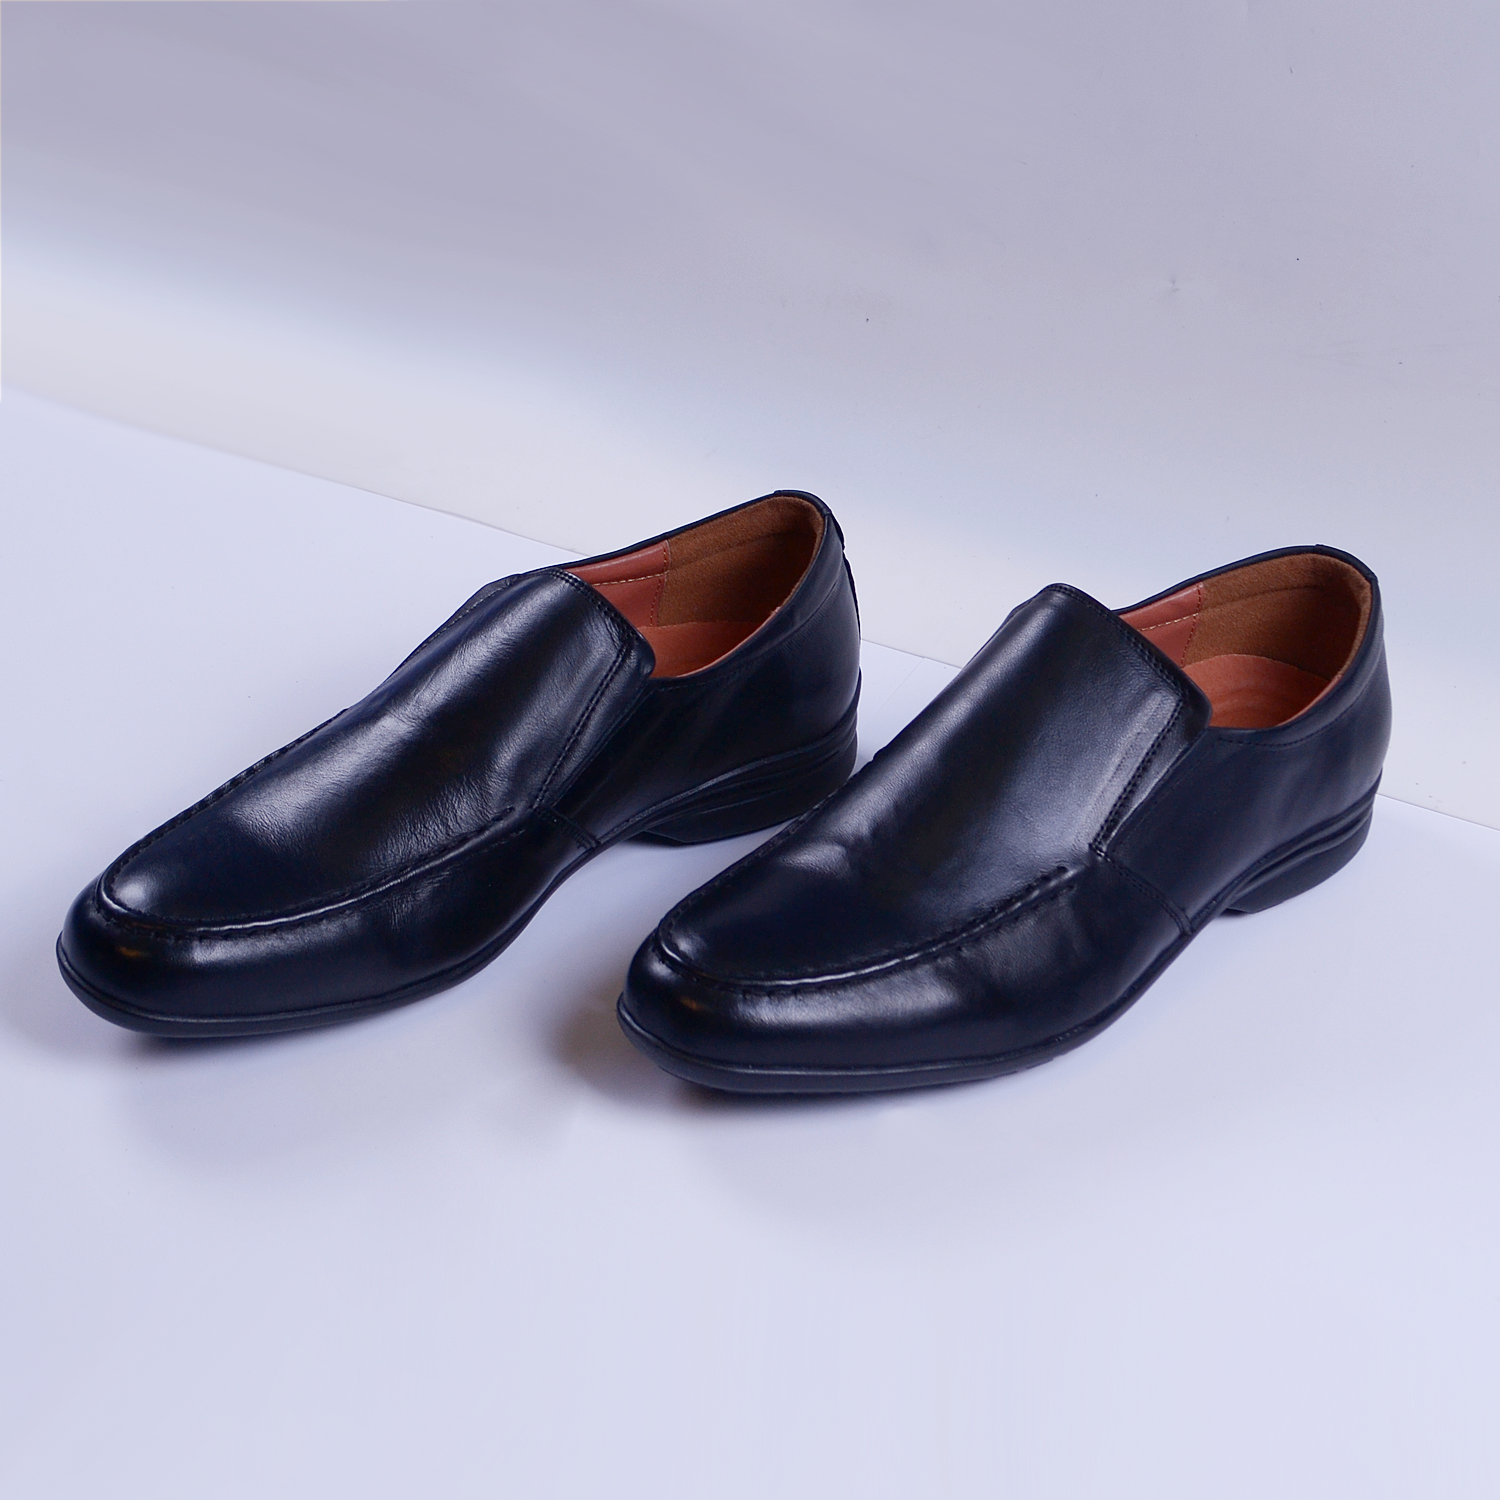 Axel 20 Loafers - Rusty Lopez